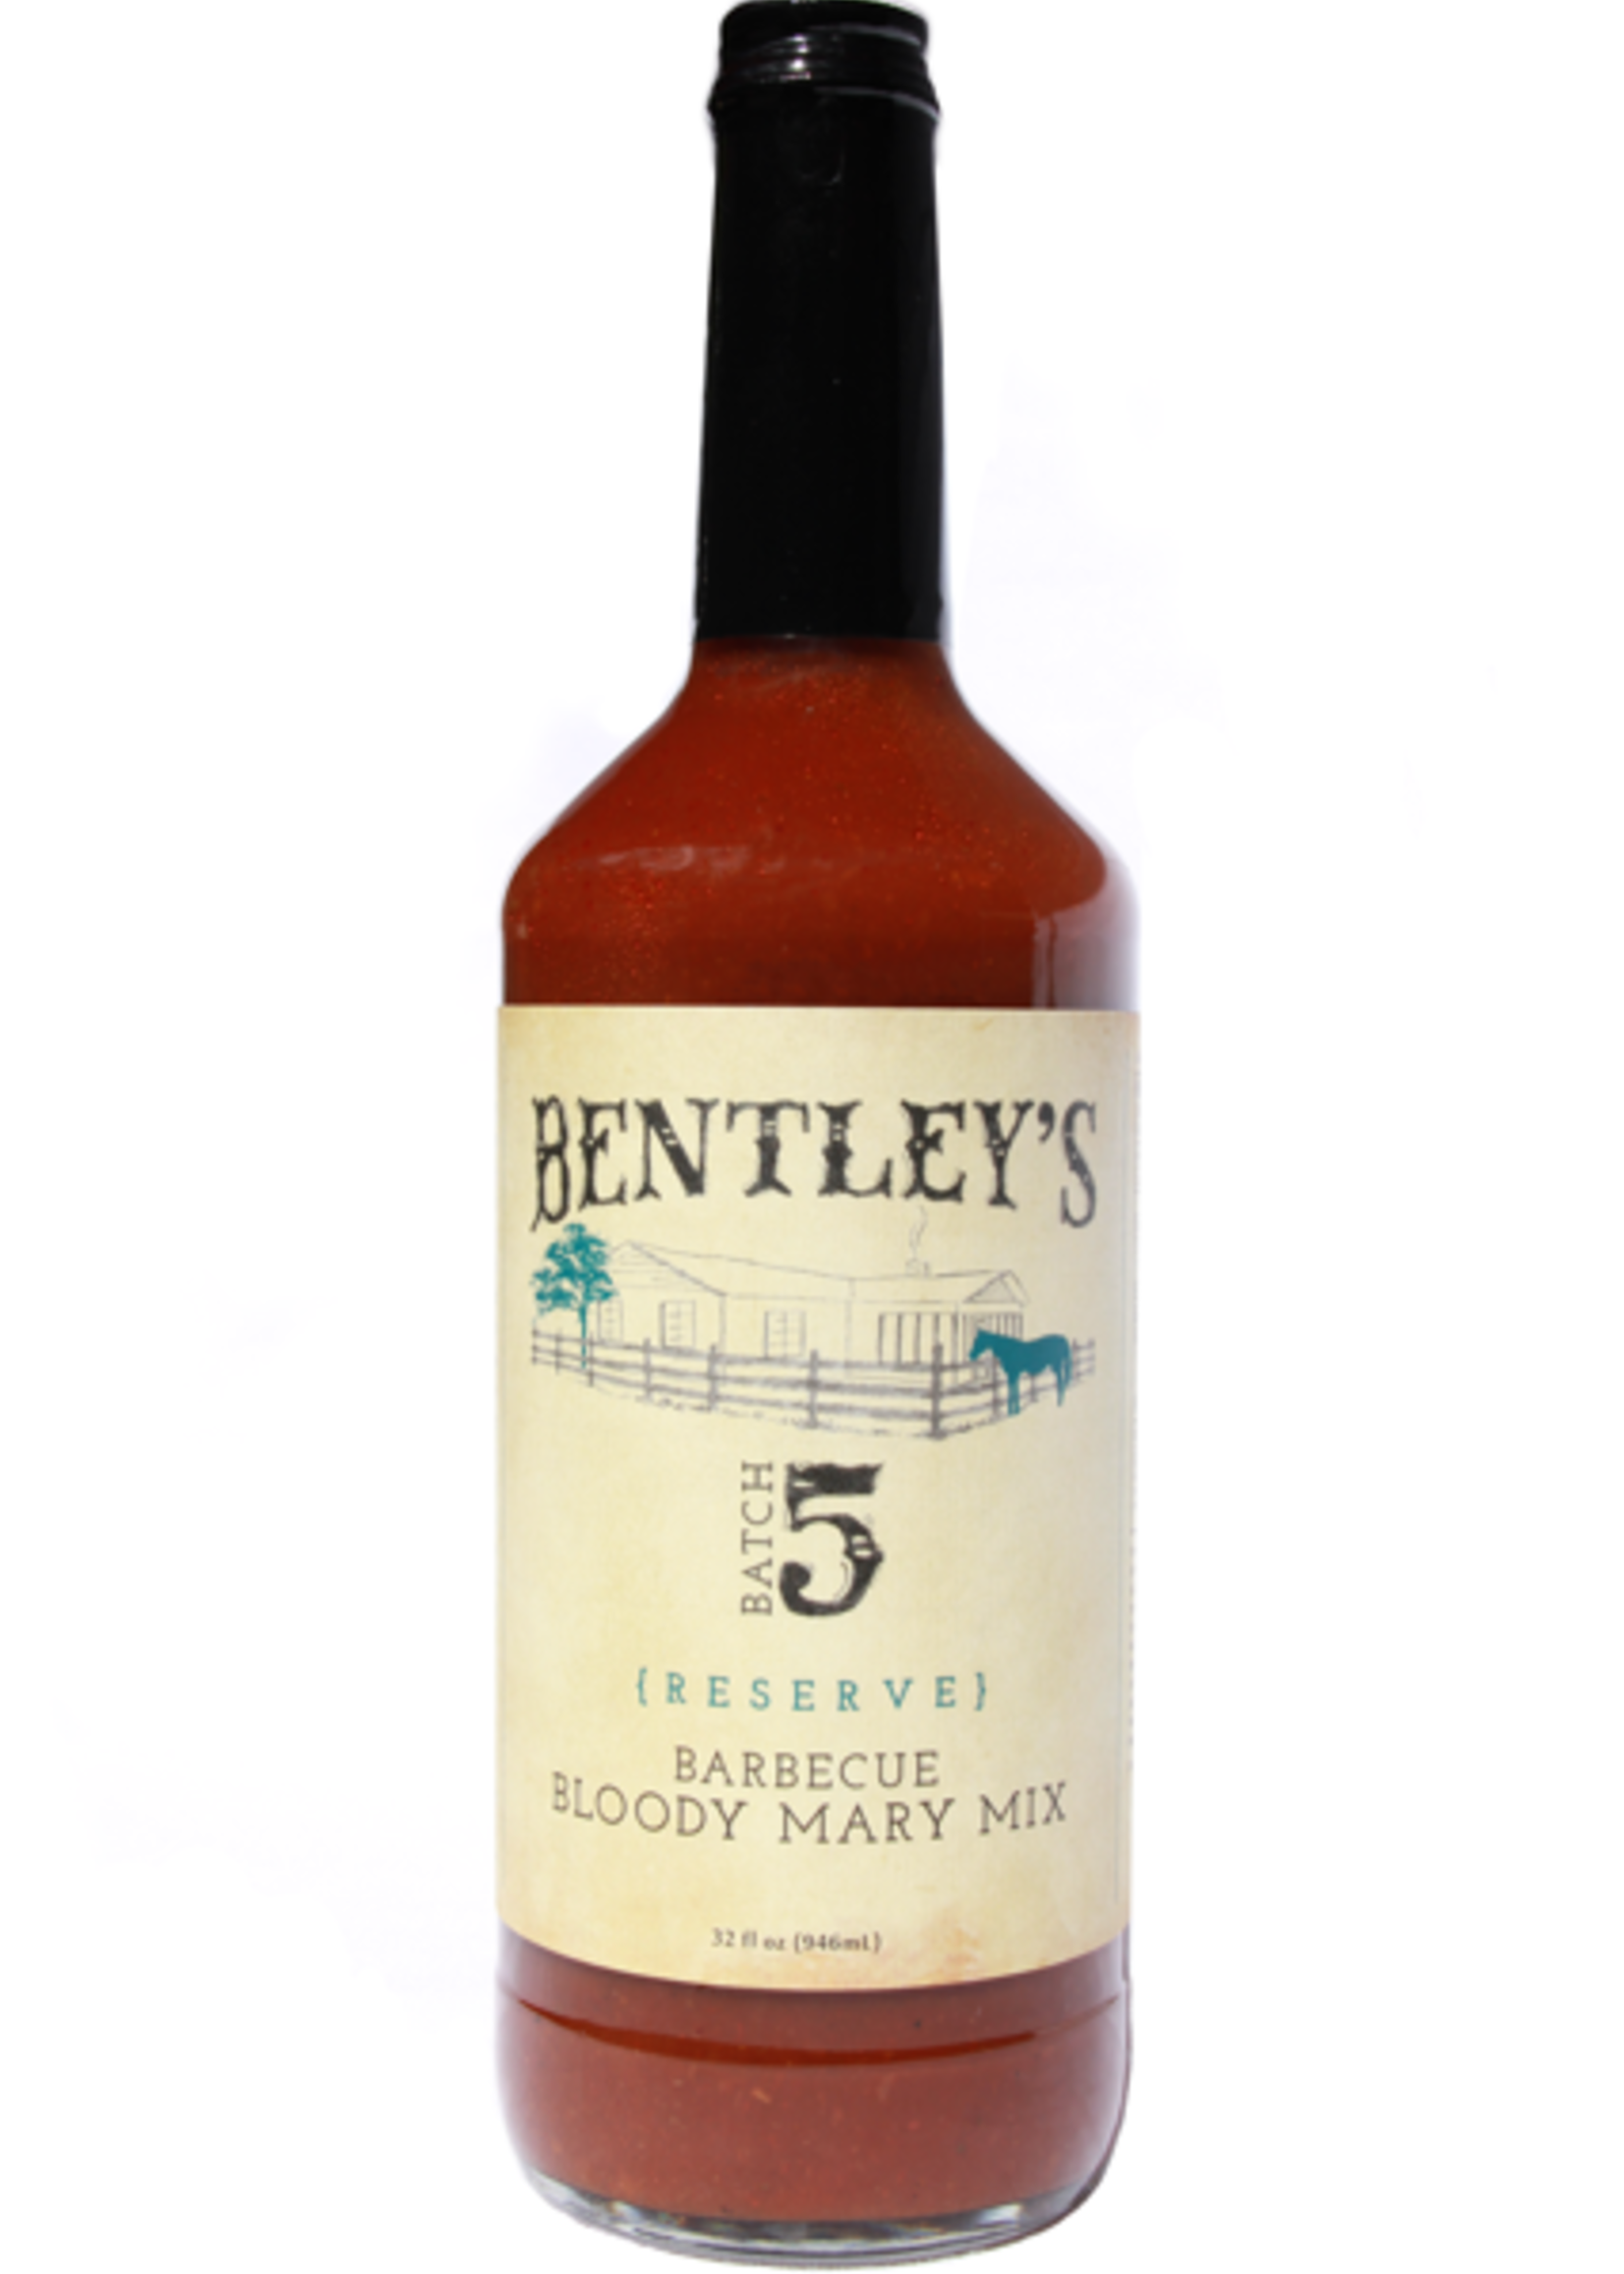 Bentley's Batch 5 Reserve Barbecue Bloody Mary 32 oz.